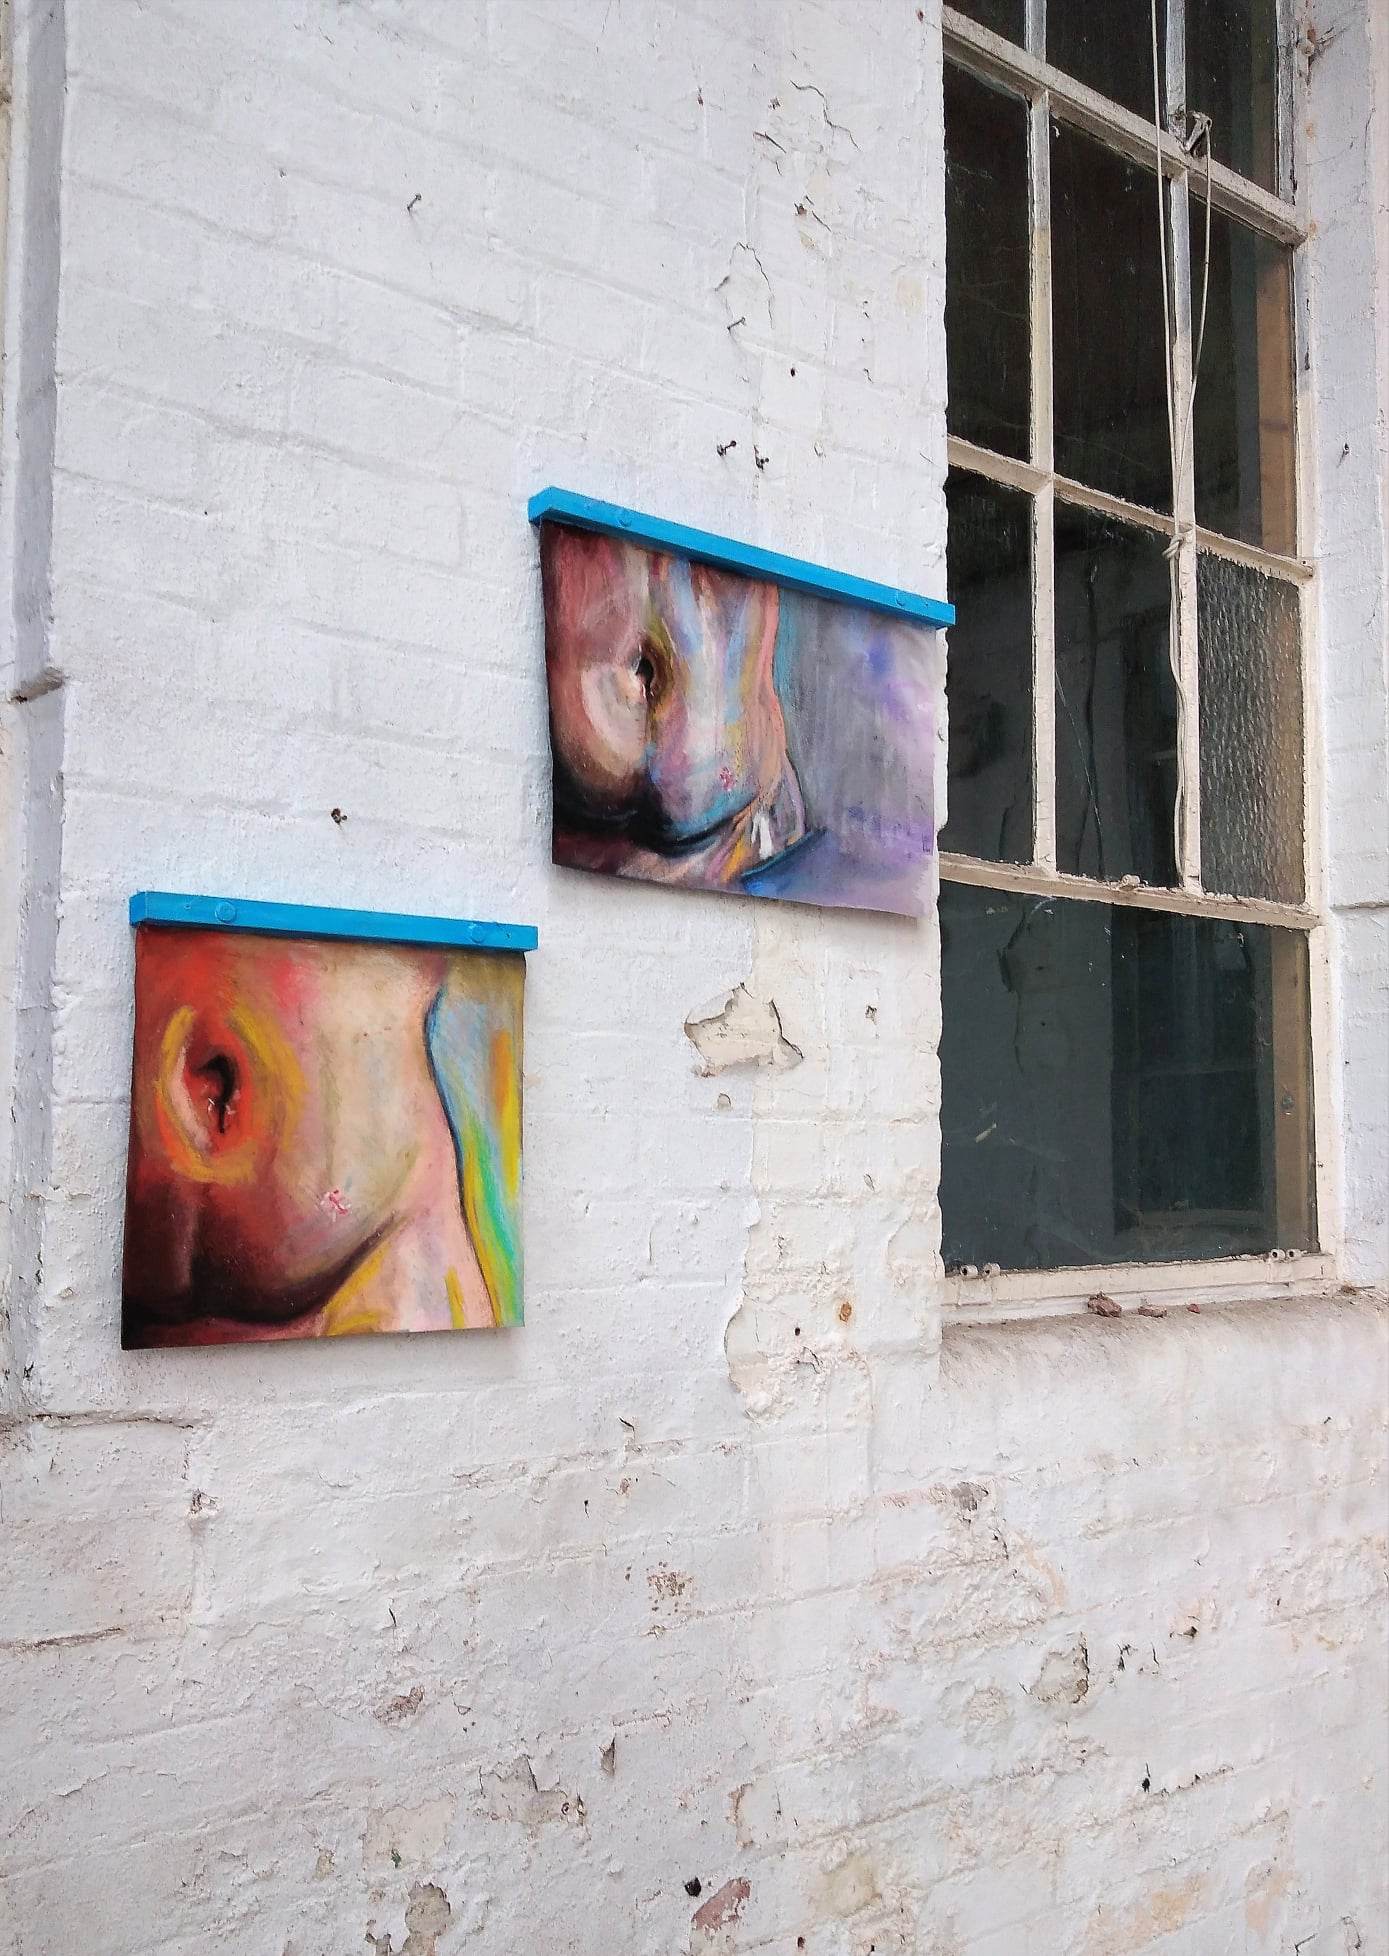 A diptych piece featuring different angles of the abdomen, displayed against a white brick wall next to a window.